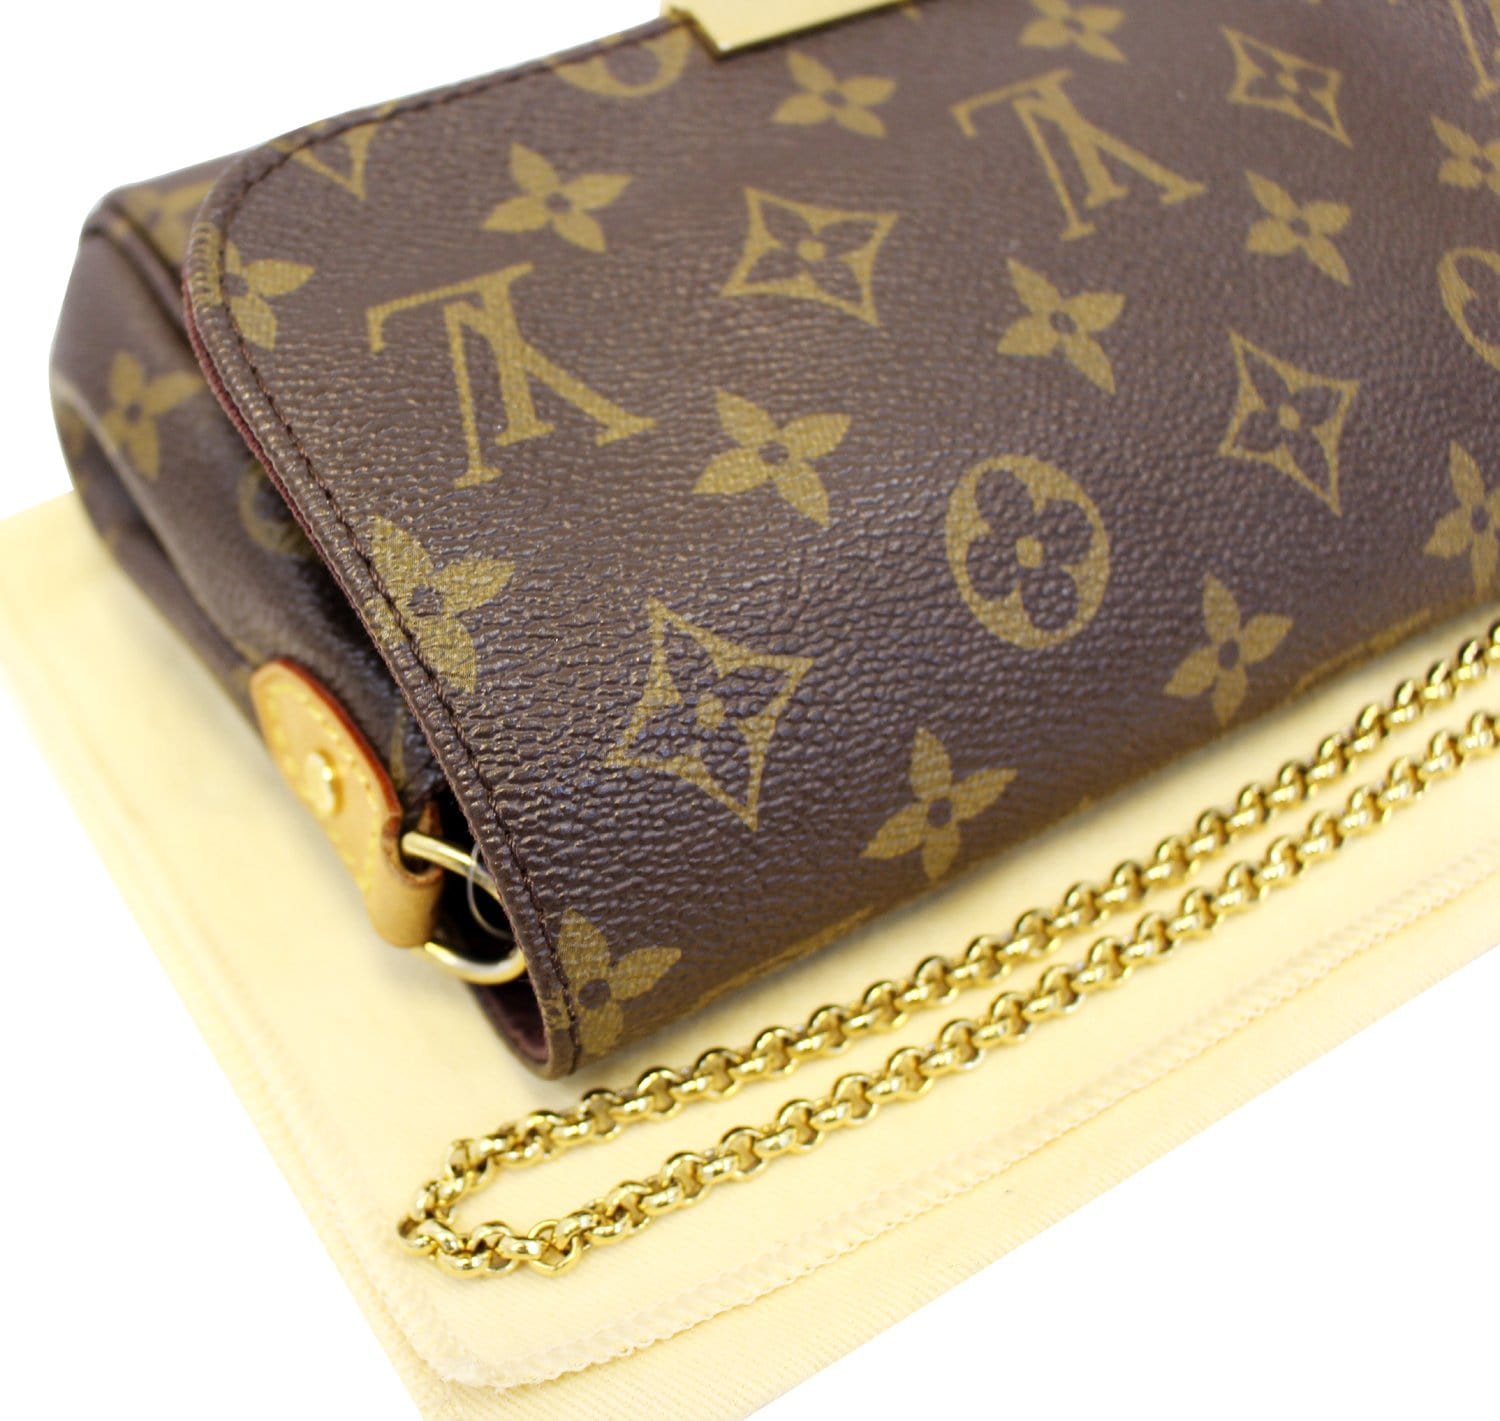 Louis Vuitton Monogram Canvas Passy. Made in France. With dustbag &  paperbag ❤️ - Canon E-Bags Prime